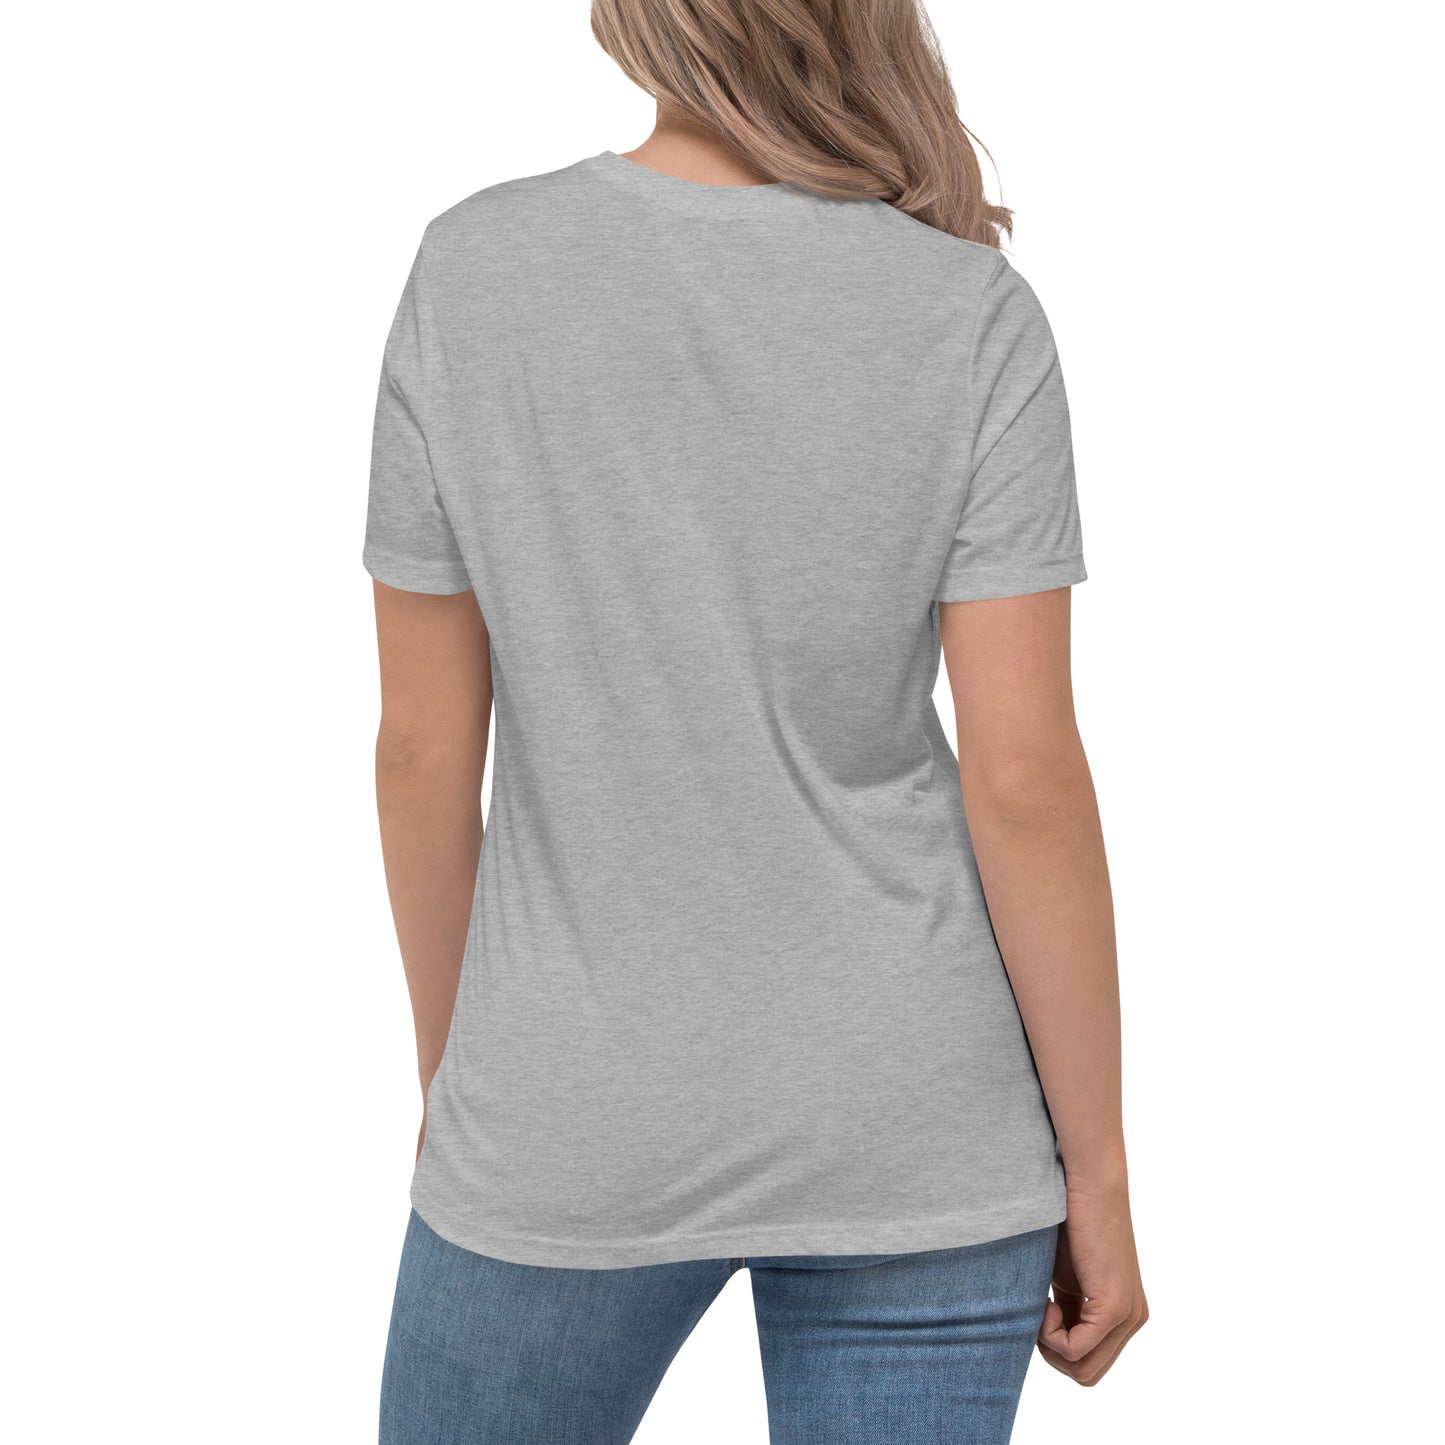 Women's Relaxed Soft & Smooth Premium Quality T-Shirt Simple Is Beautiful Design by IOBI Original Apparel